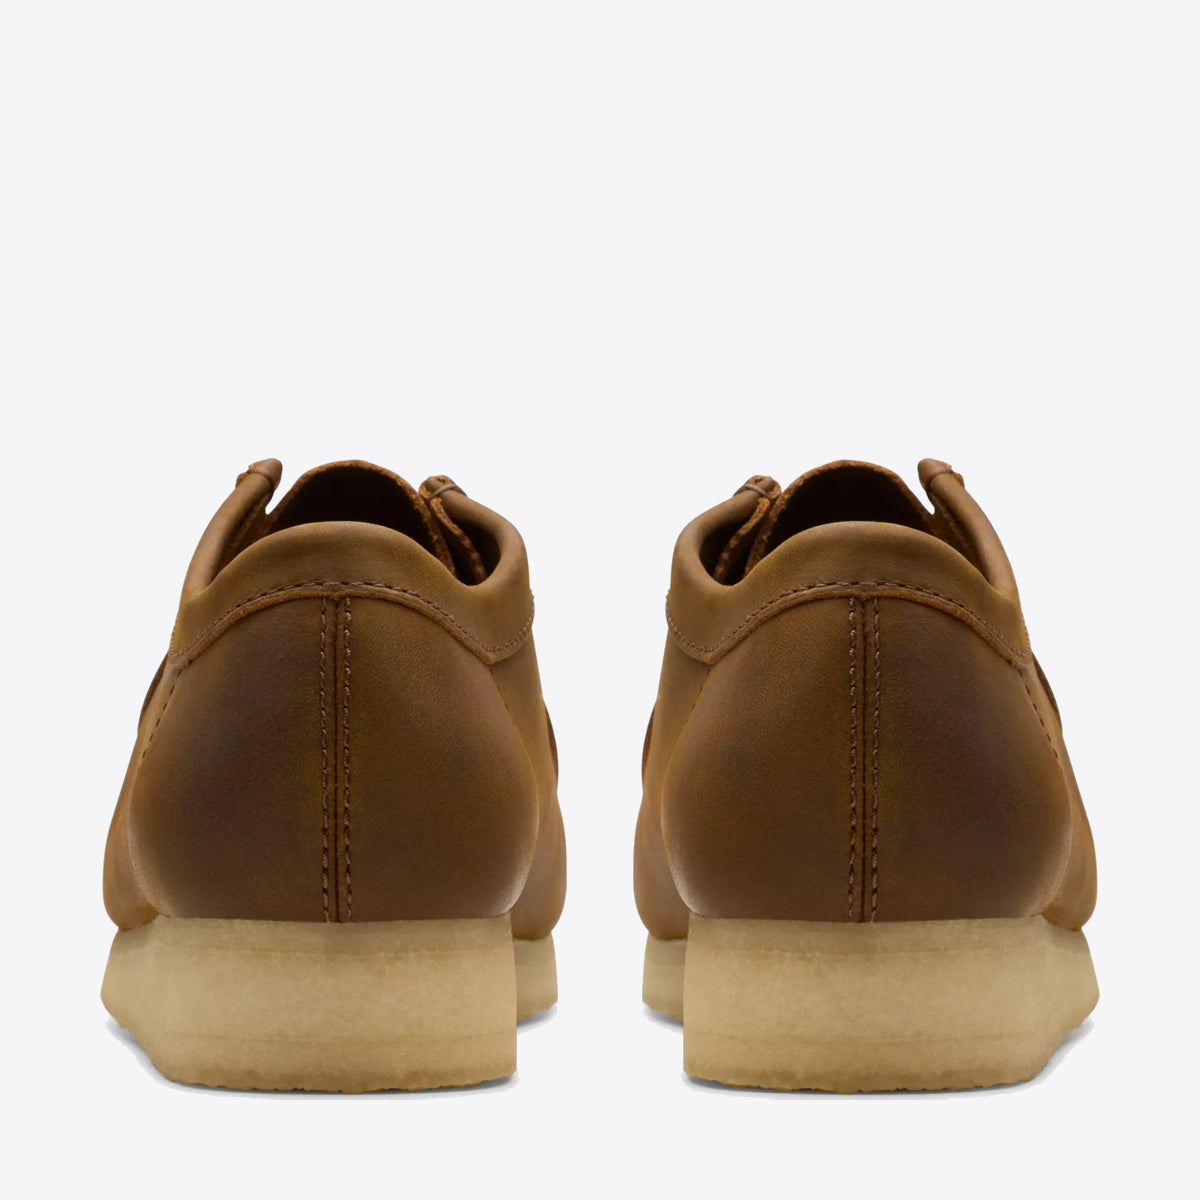 CLARKS Wallabee Shoe Suede Beeswax - Image 5